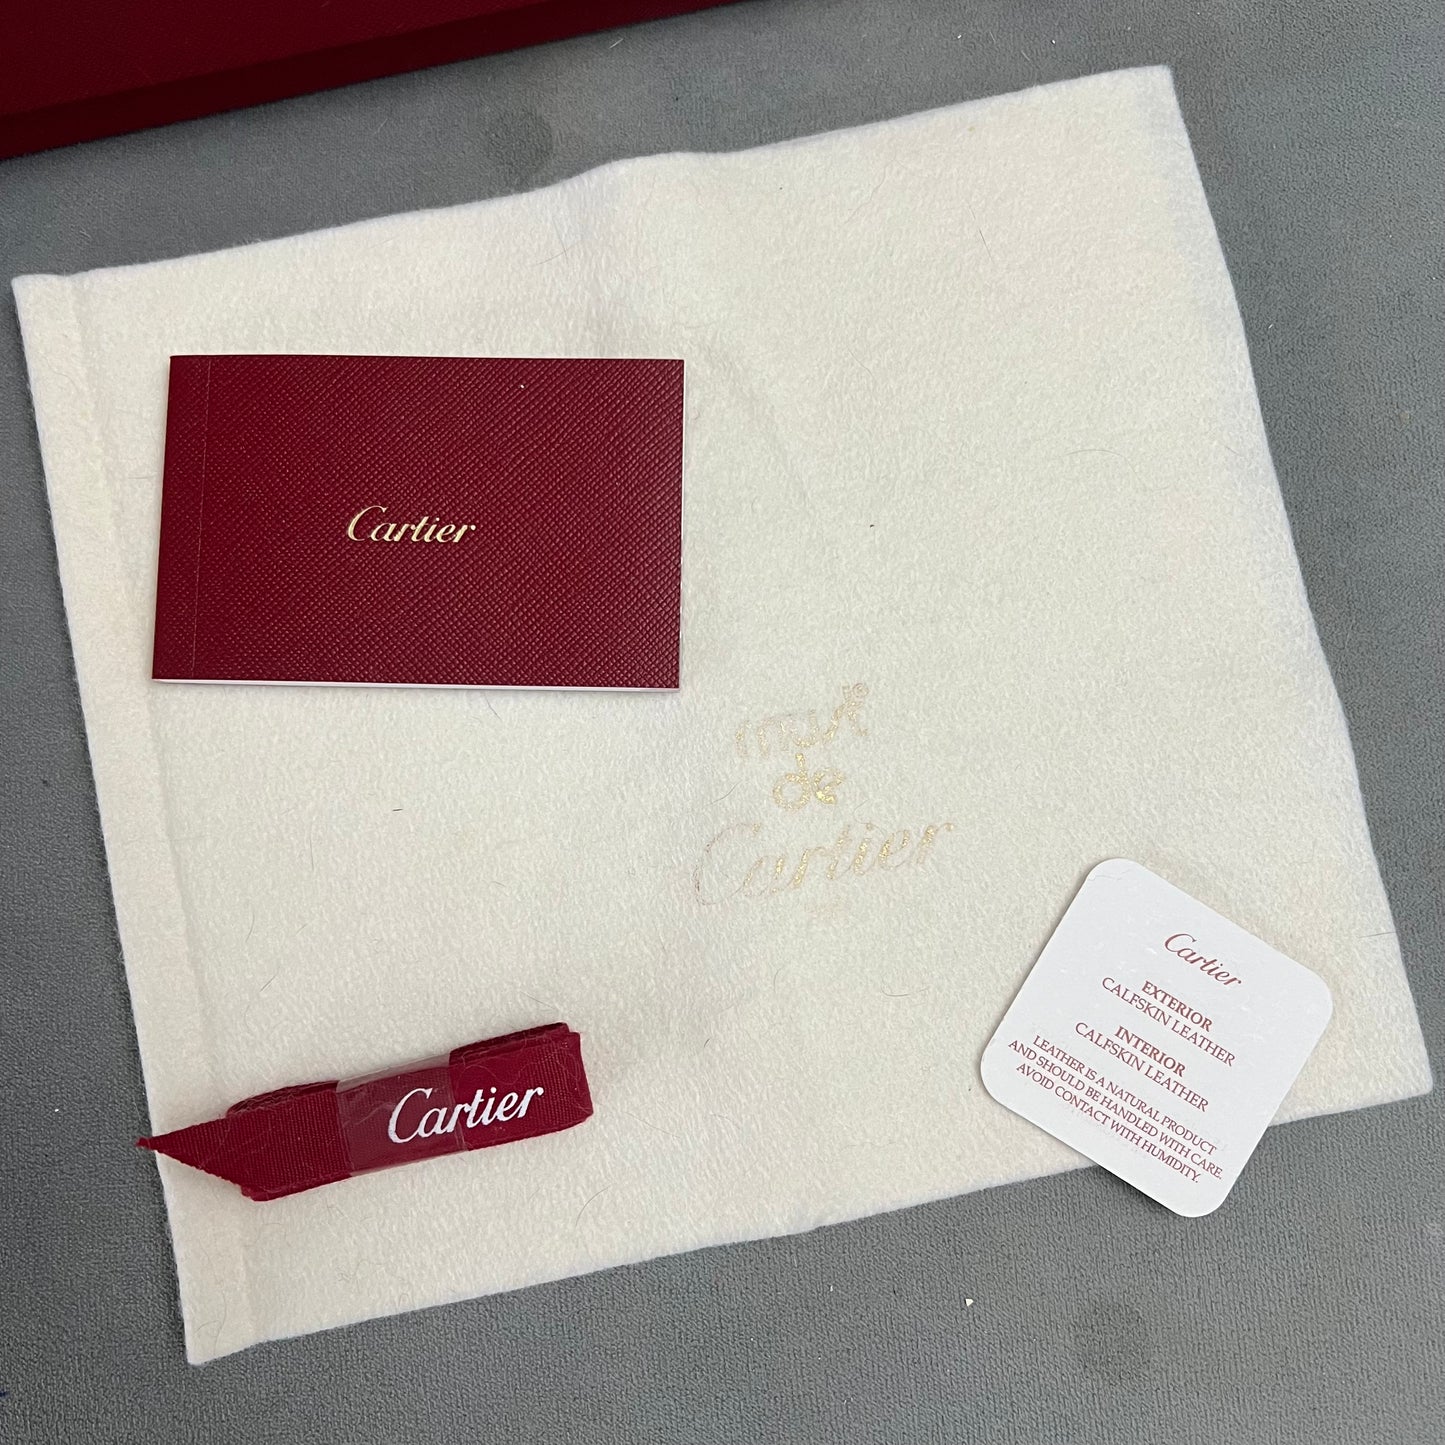 CARTIER Wallet Box 9.10x4.75x1.90 inches + Filled Certificate + Ribbon